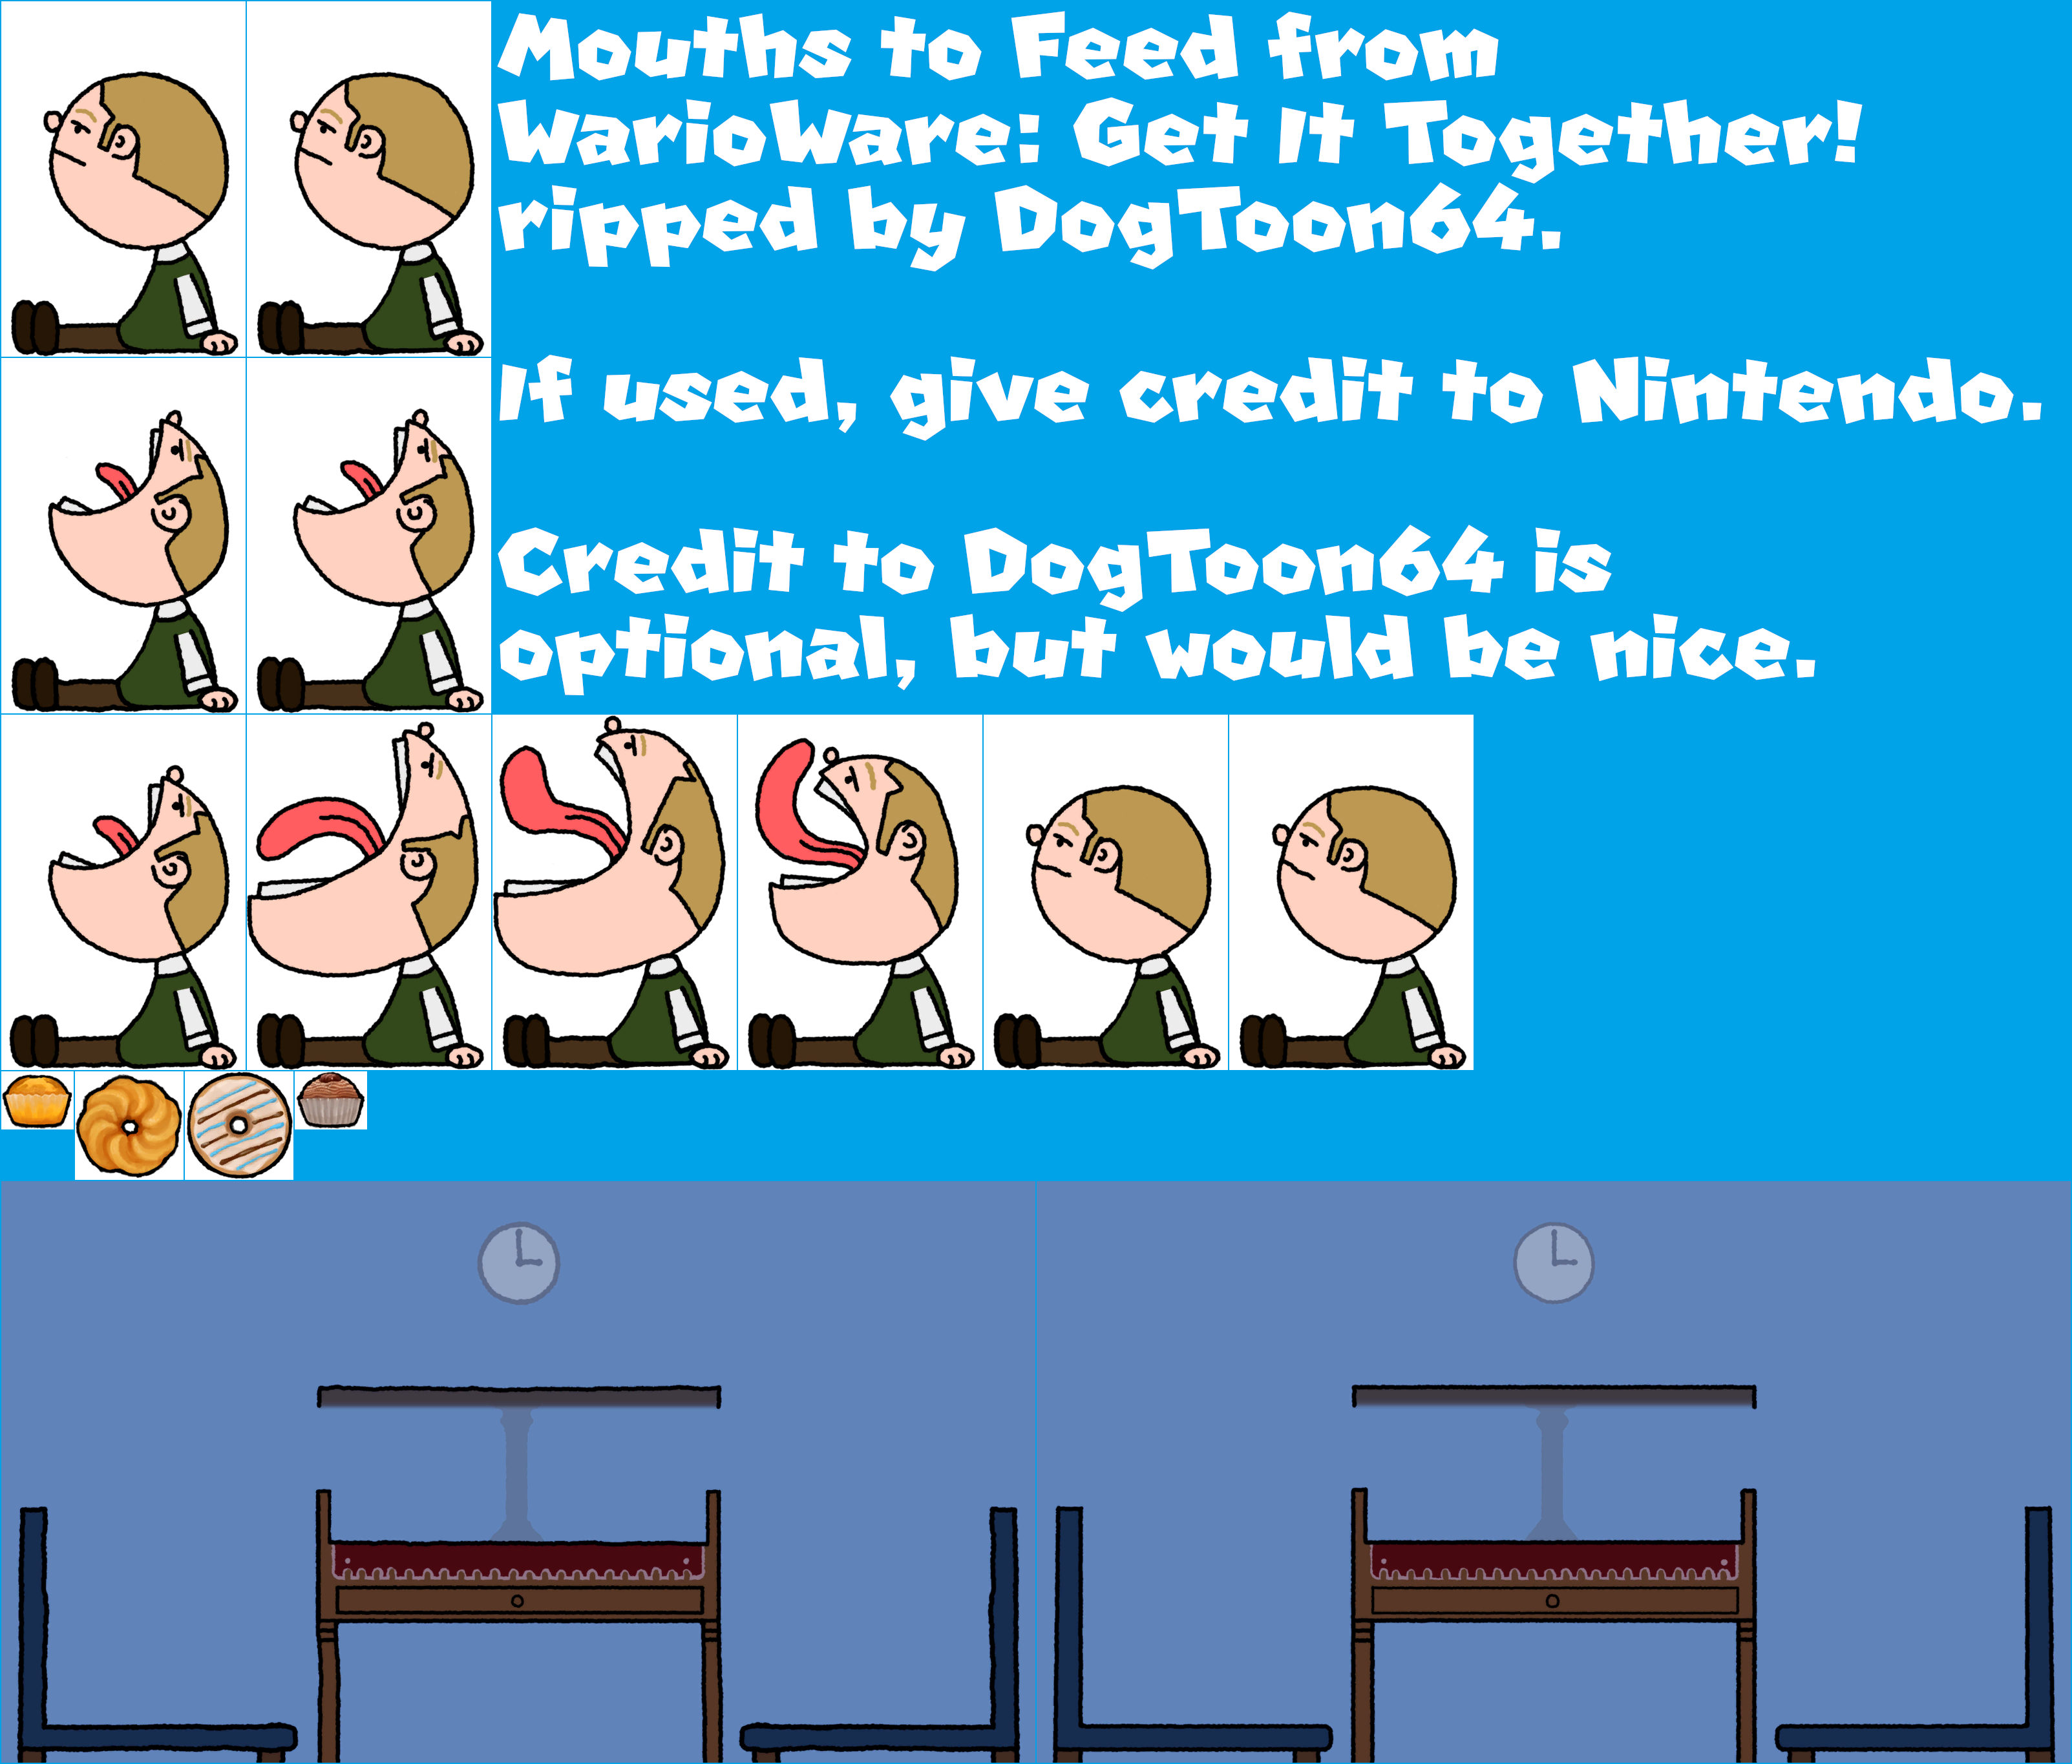 WarioWare: Get It Together! - Mouths to Feed